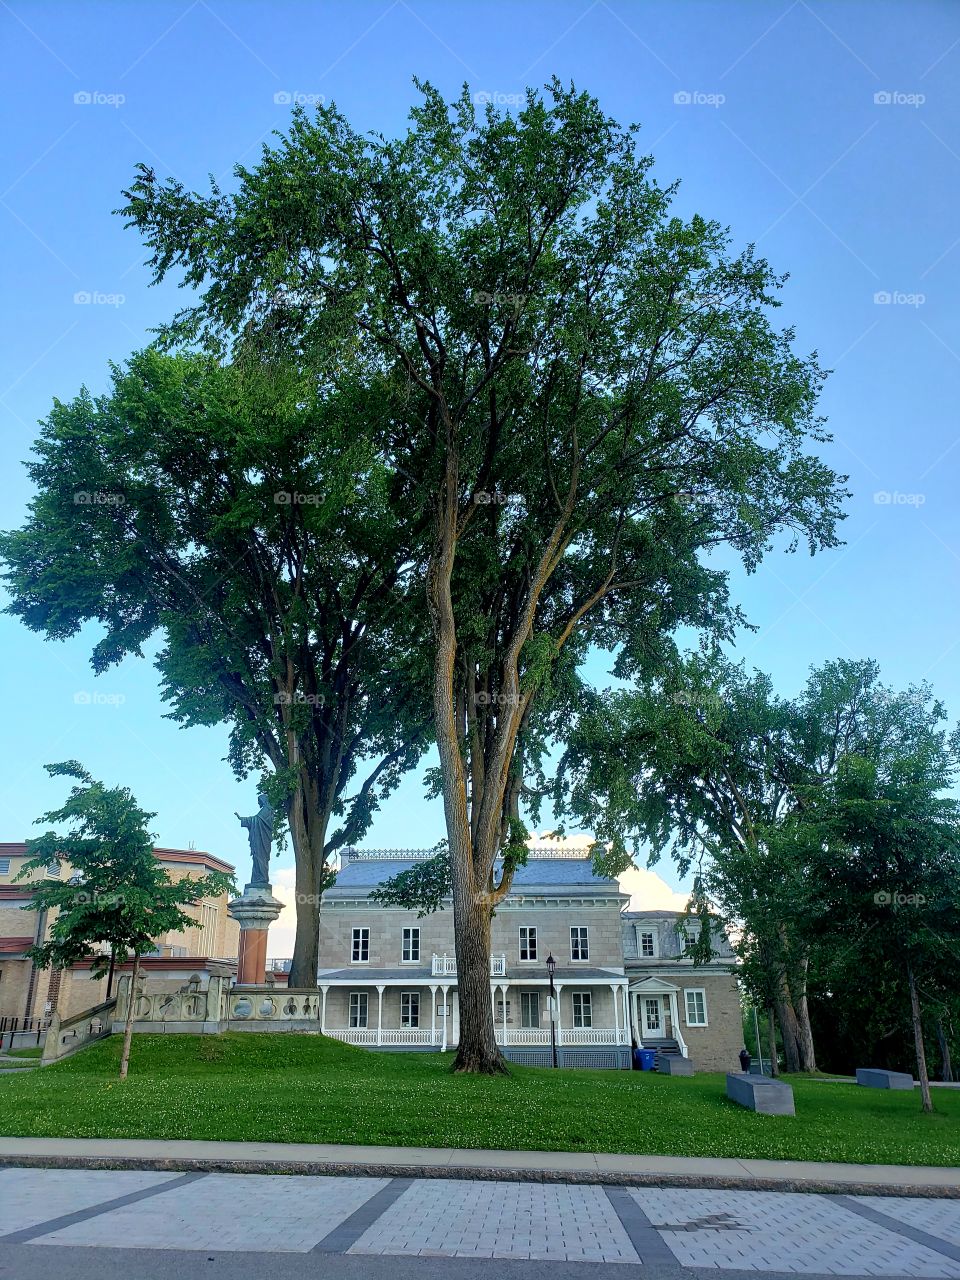 old building and tree